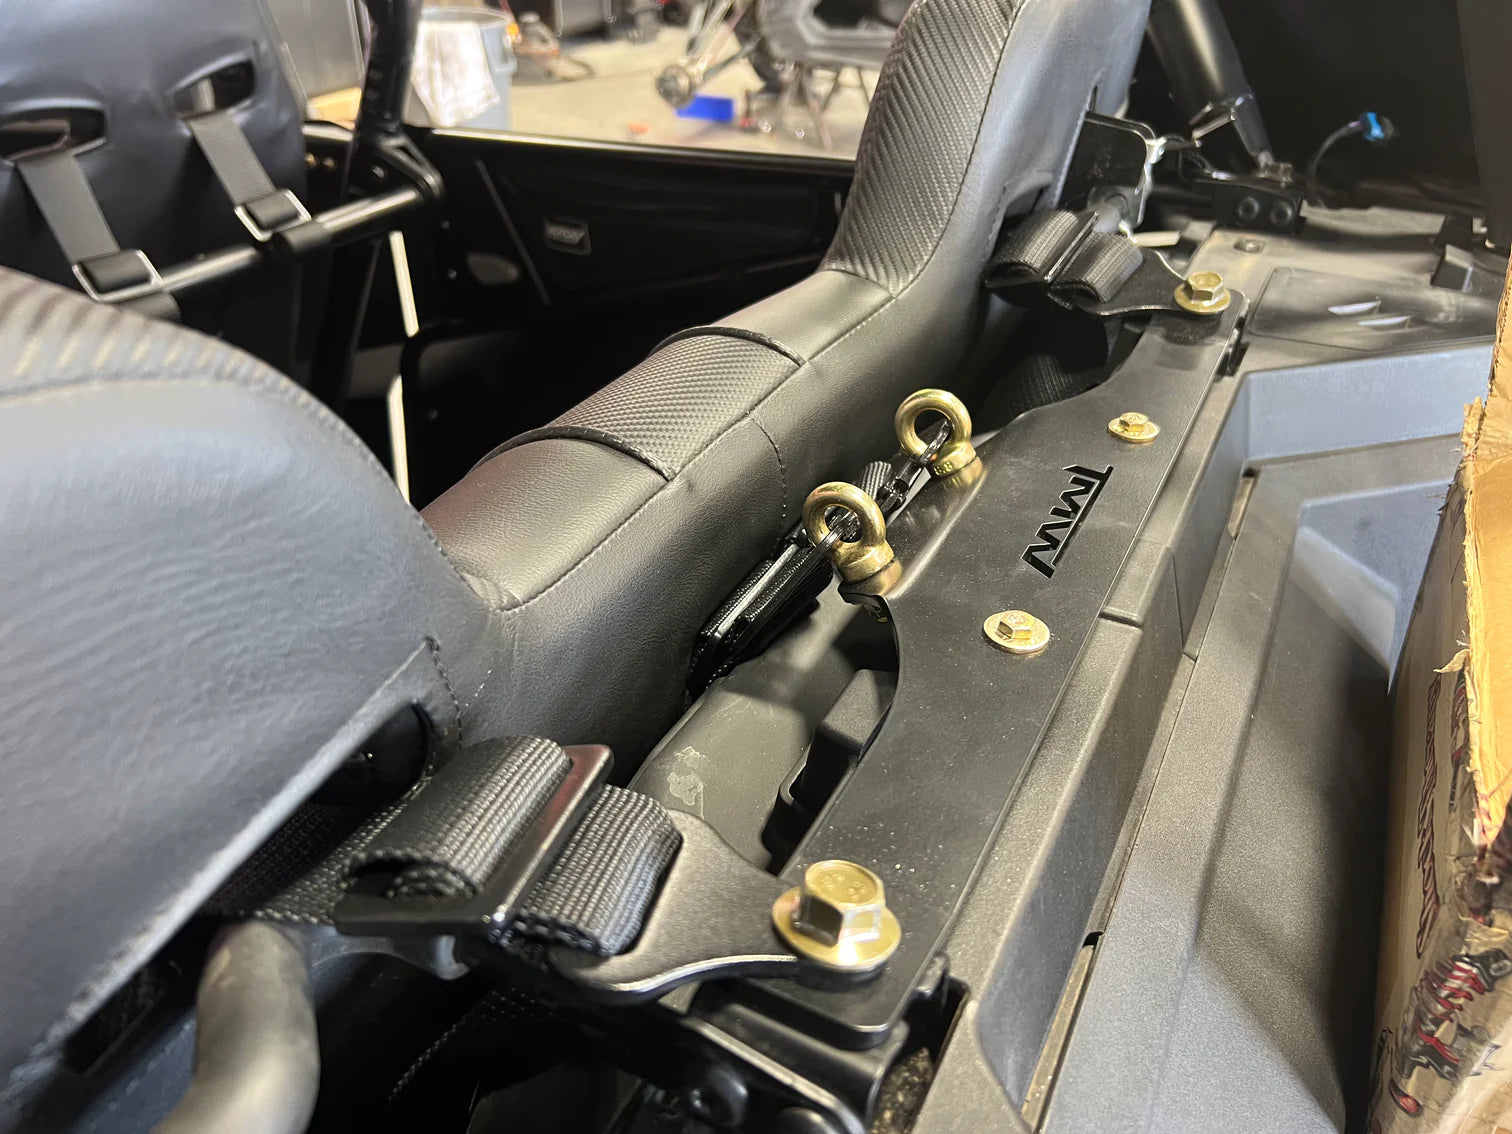 PRO R/Turbo R center harness mount for bench seat